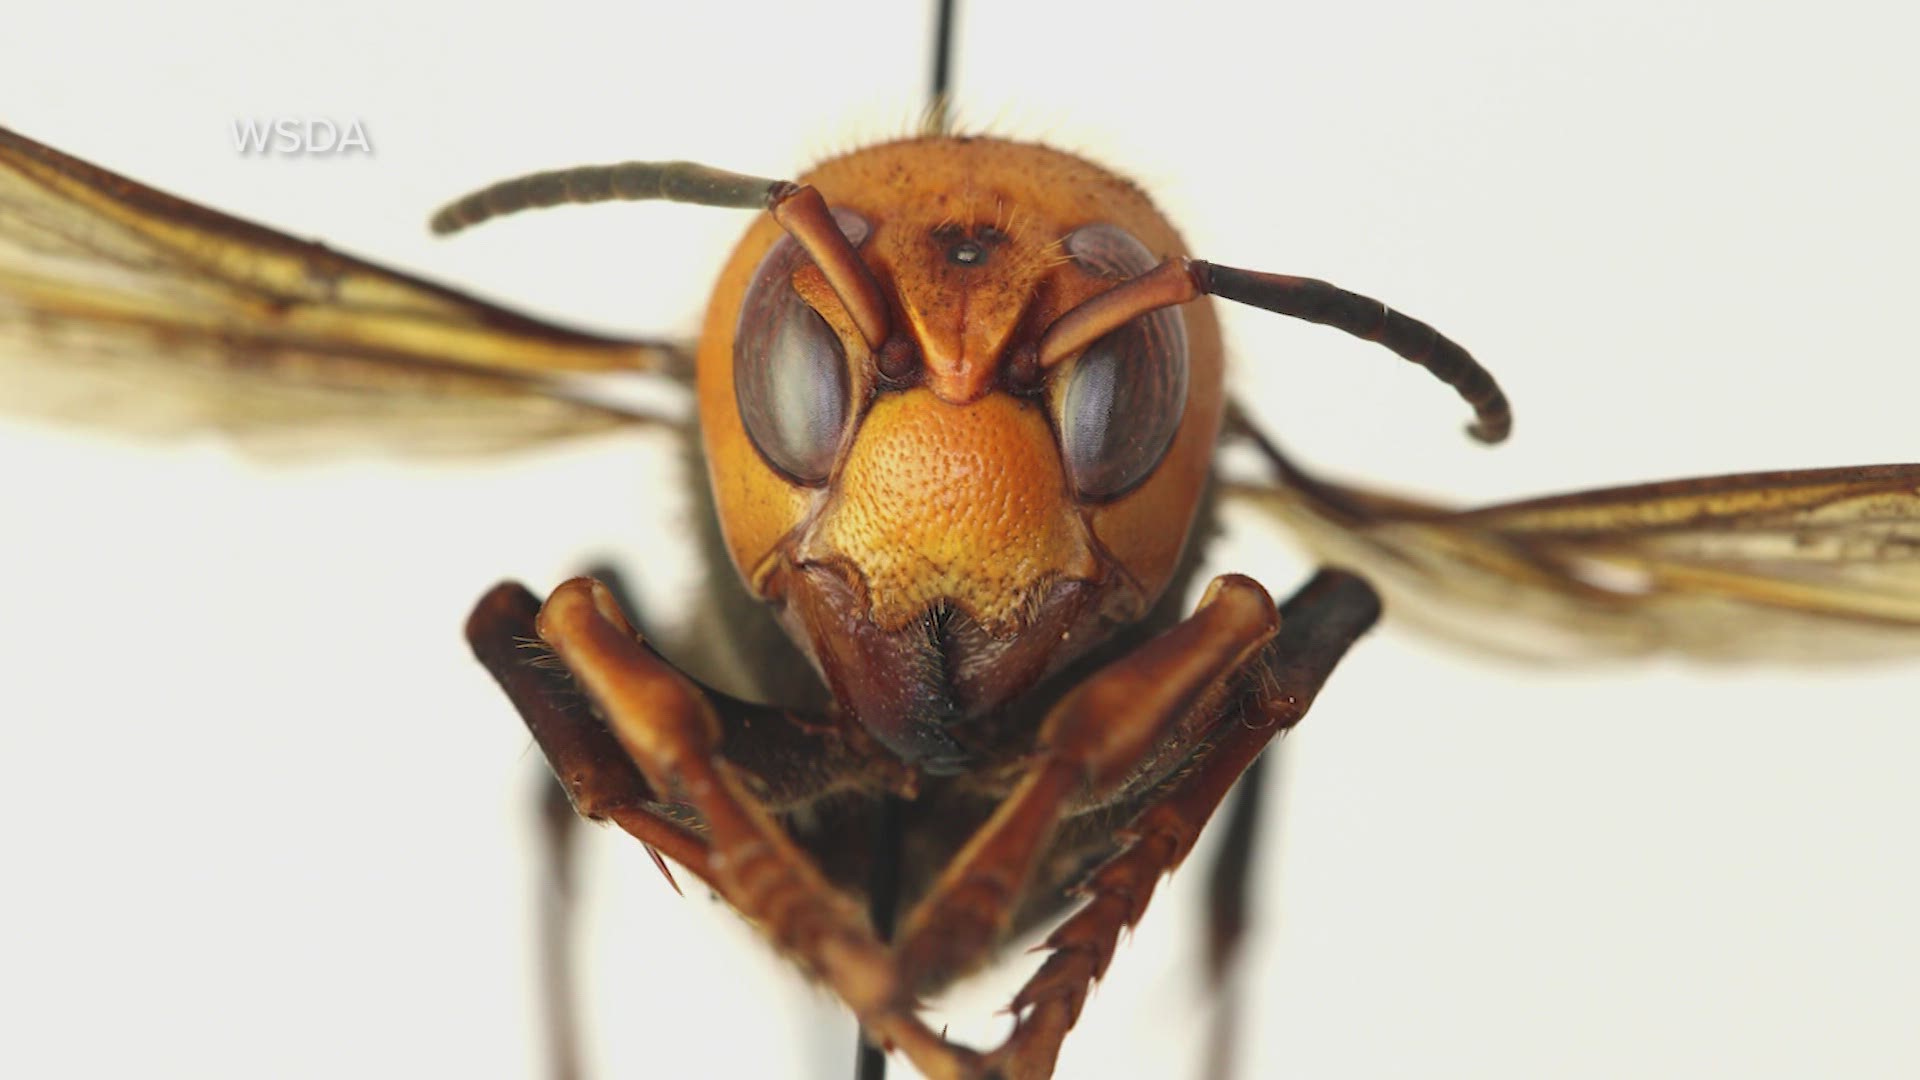 The Asian giant hornet was recently found in Washington and can devastate bee populations. Some people have nicknamed them "murder hornets."